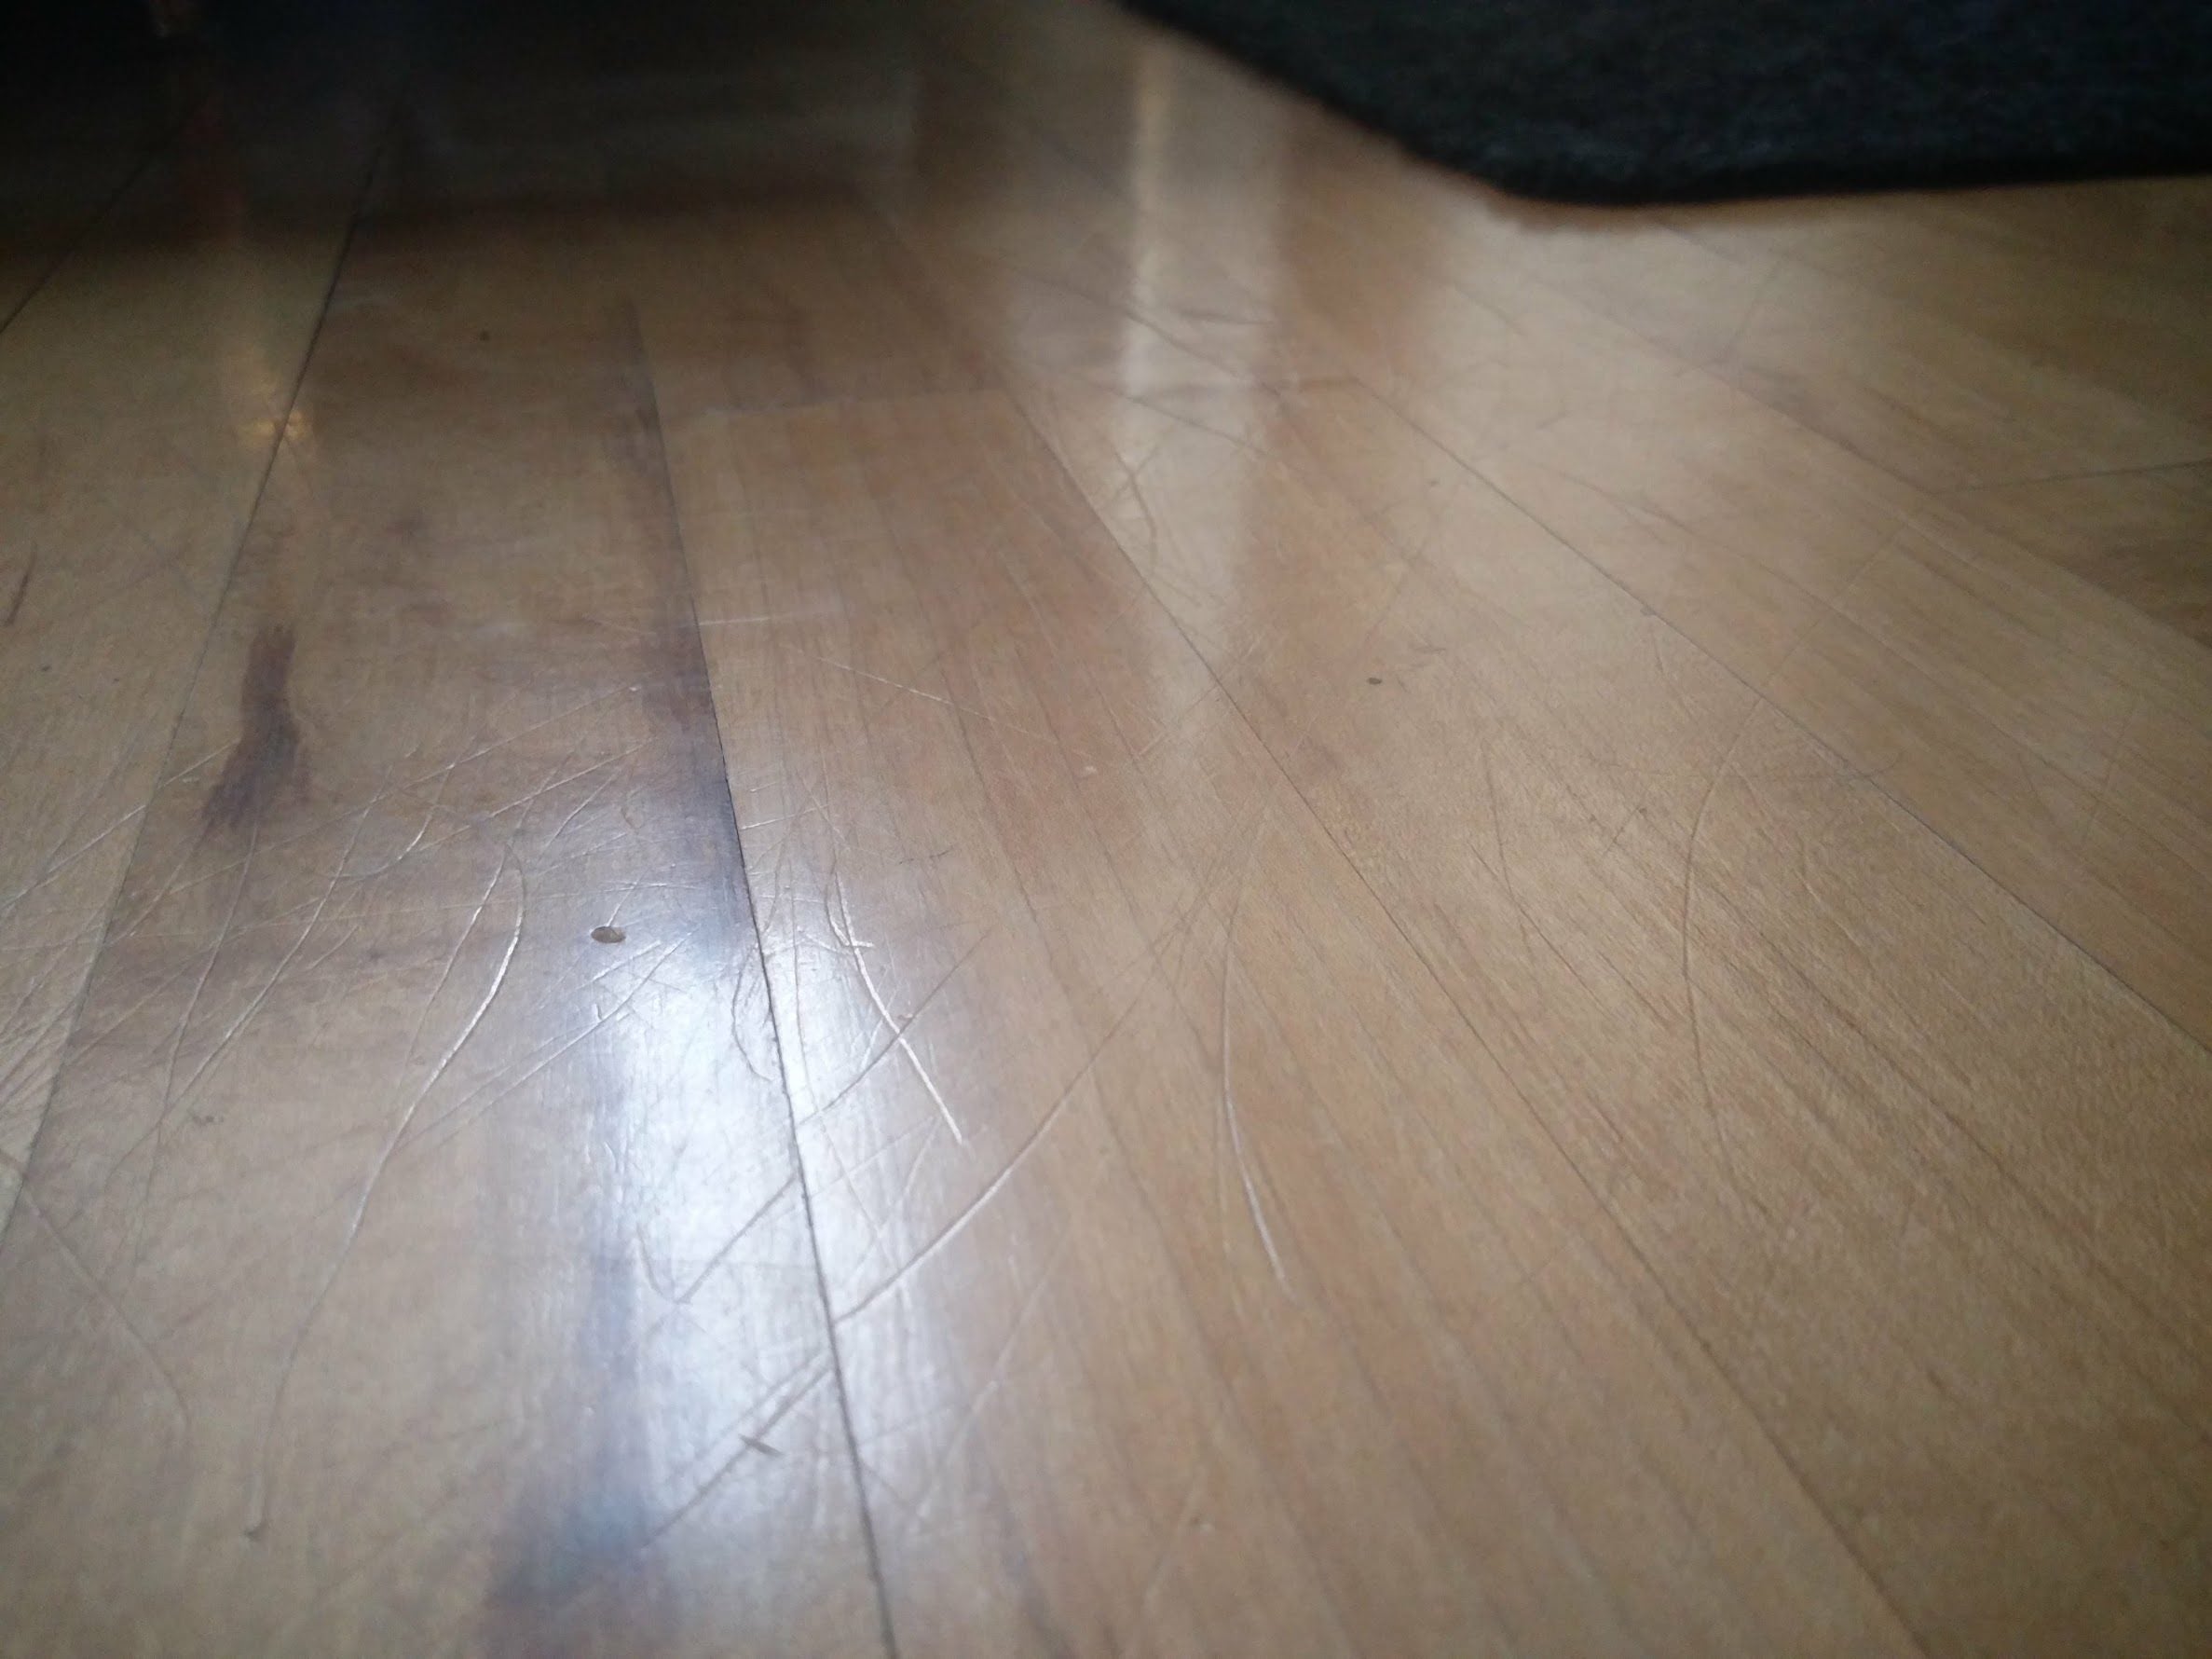 Remove Dog Nail Scratches From Hardwood, How To Get Dog Nail Scratches Out Of Laminate Floors